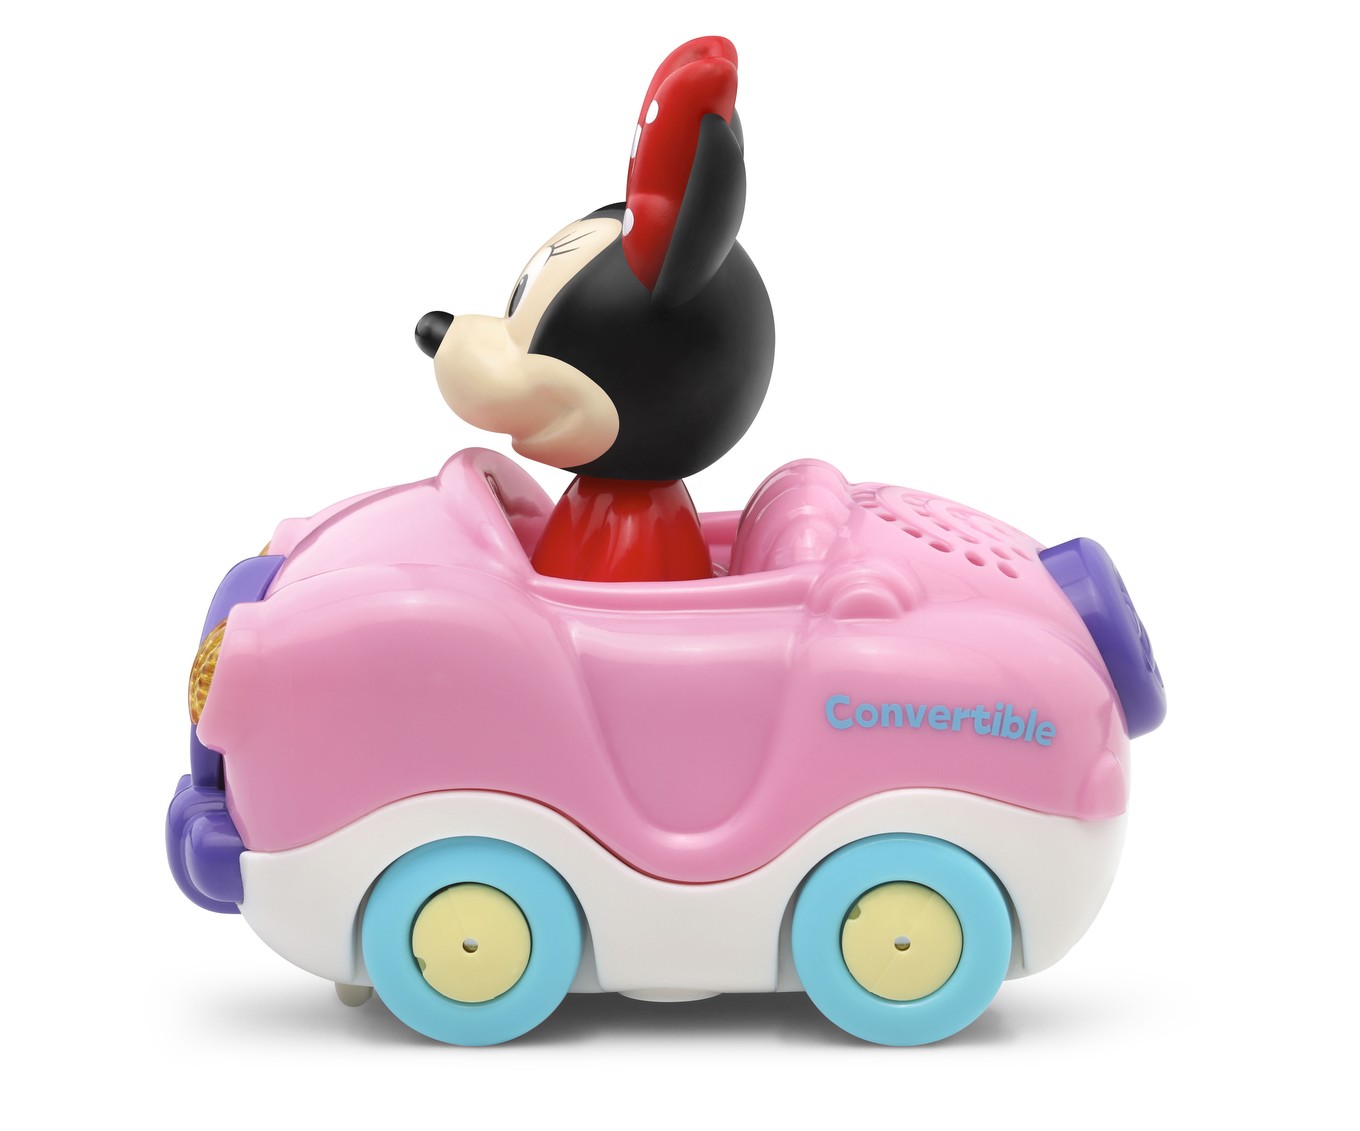 minnie mouse infant toys